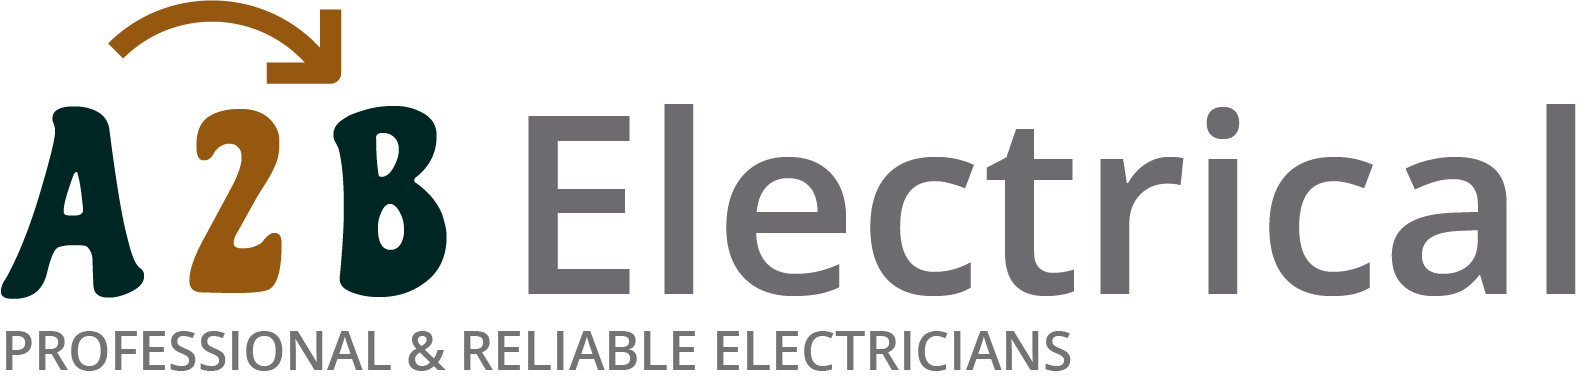 If you have electrical wiring problems in Chepping Wycombe, we can provide an electrician to have a look for you. 